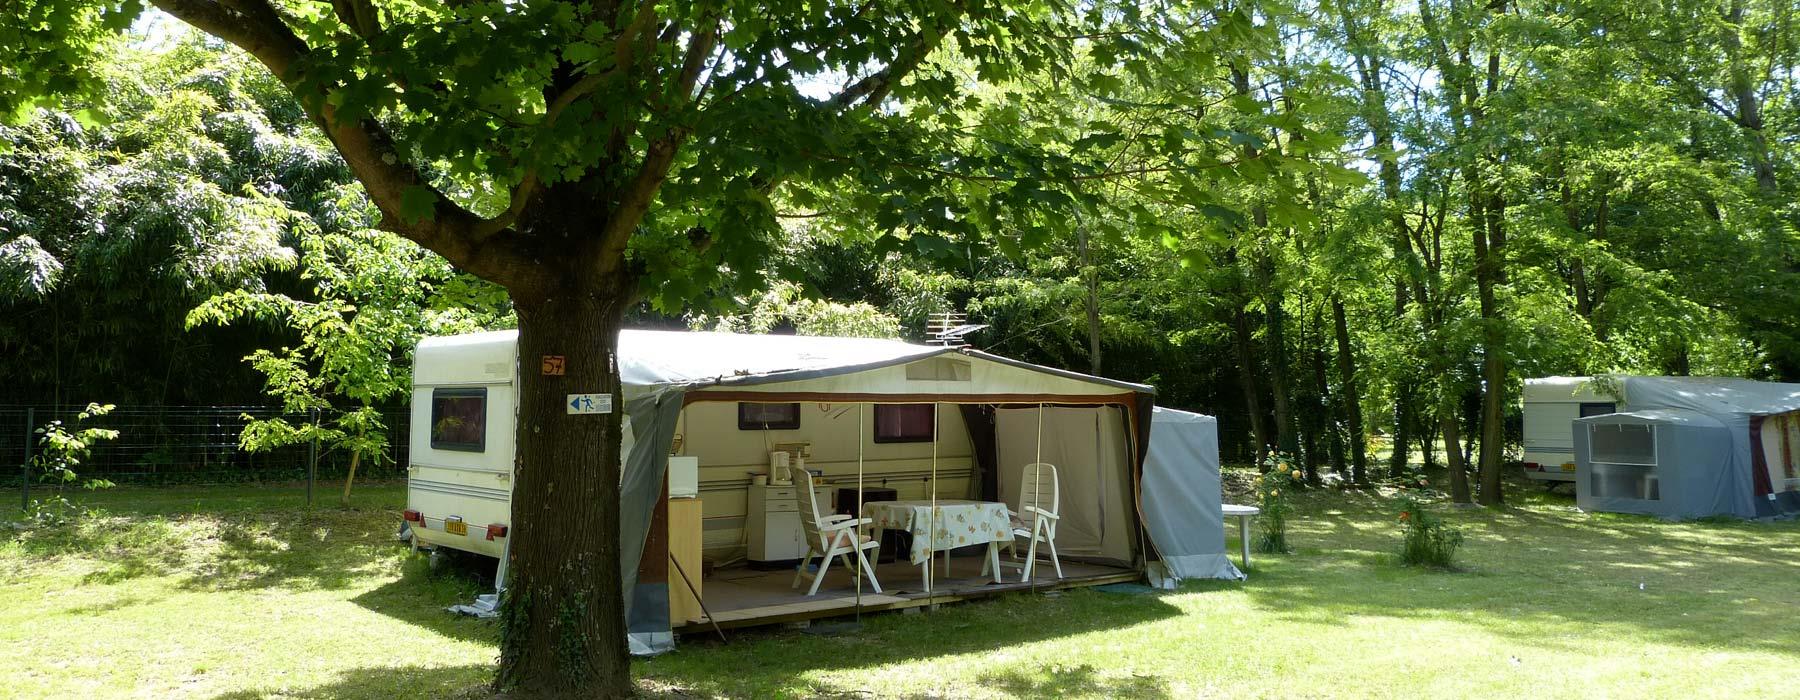 Pitch - Package : Pitch - Camping Les Acacias